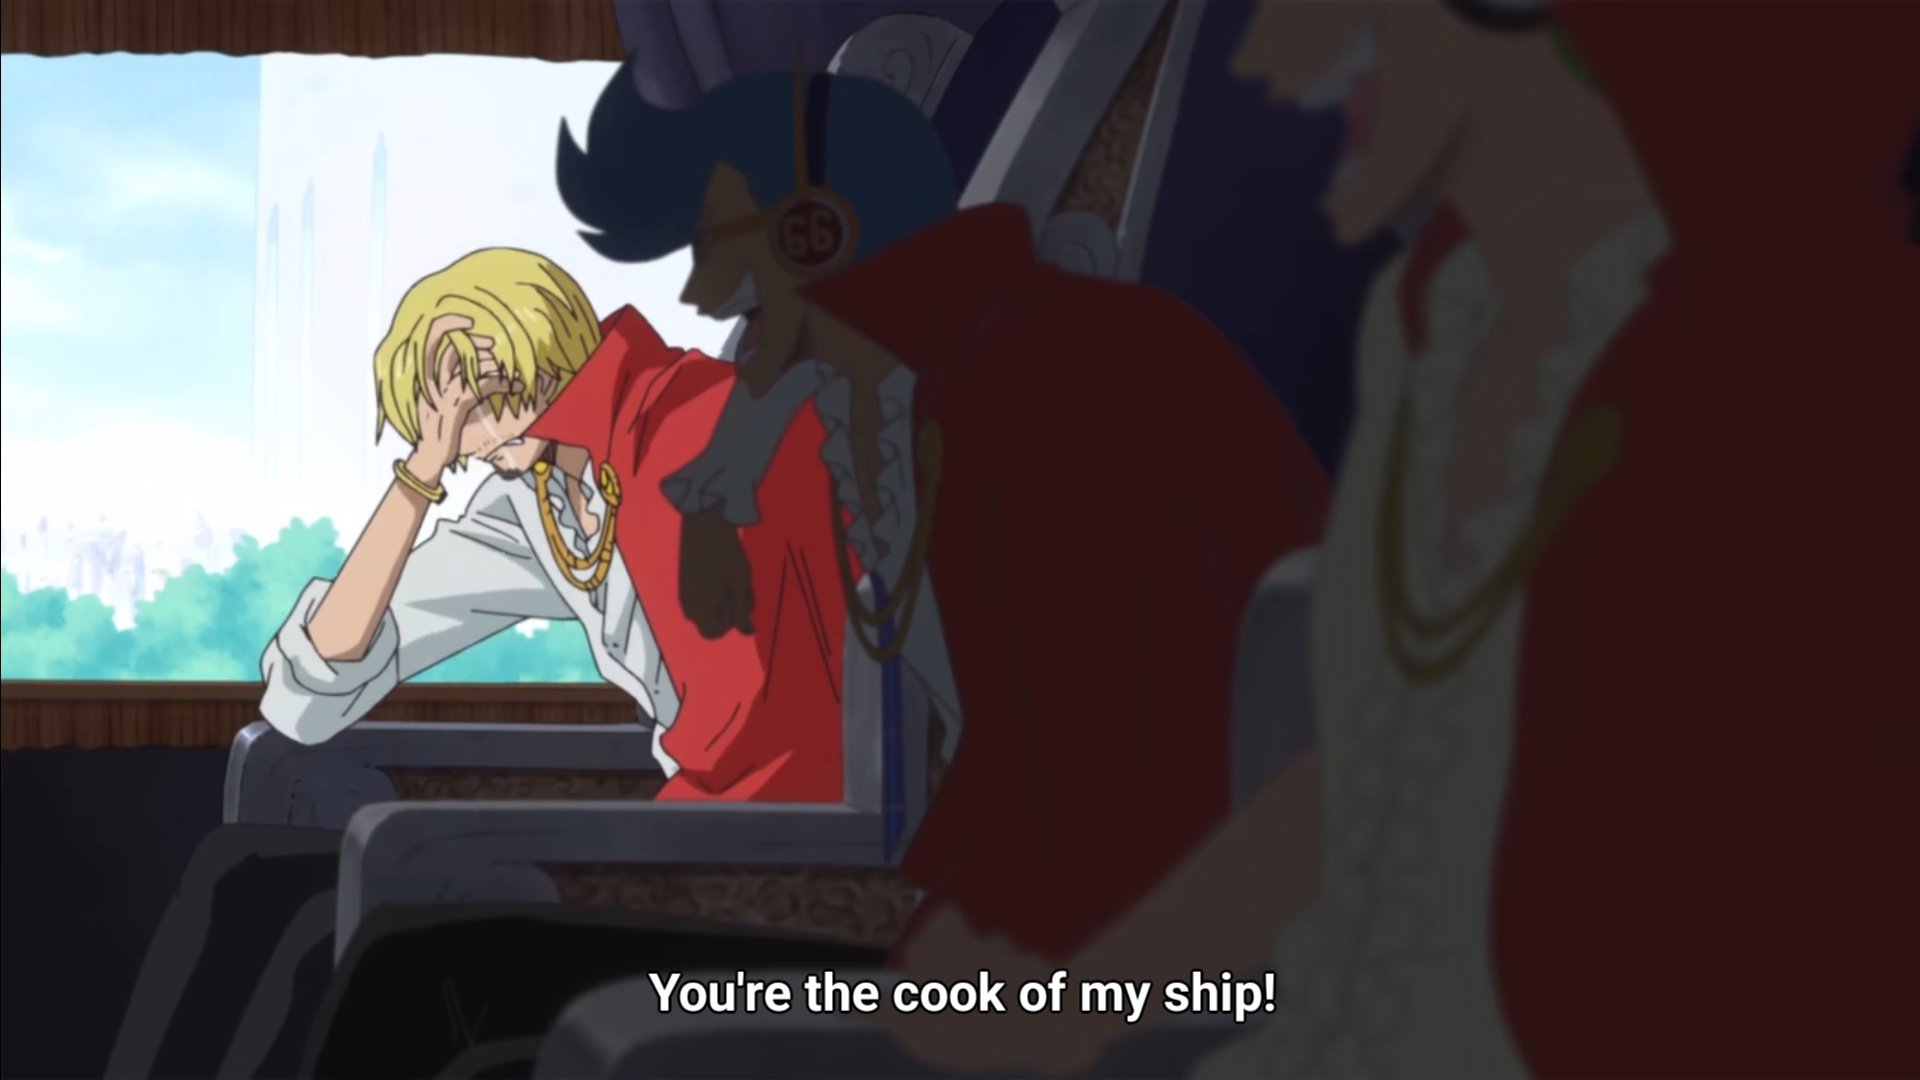 andi 🍋 ceo of sanji on X: luffy in wci: you're the cook of my ship sanji  in wano: i'm the cook of the straw hats :')))  / X